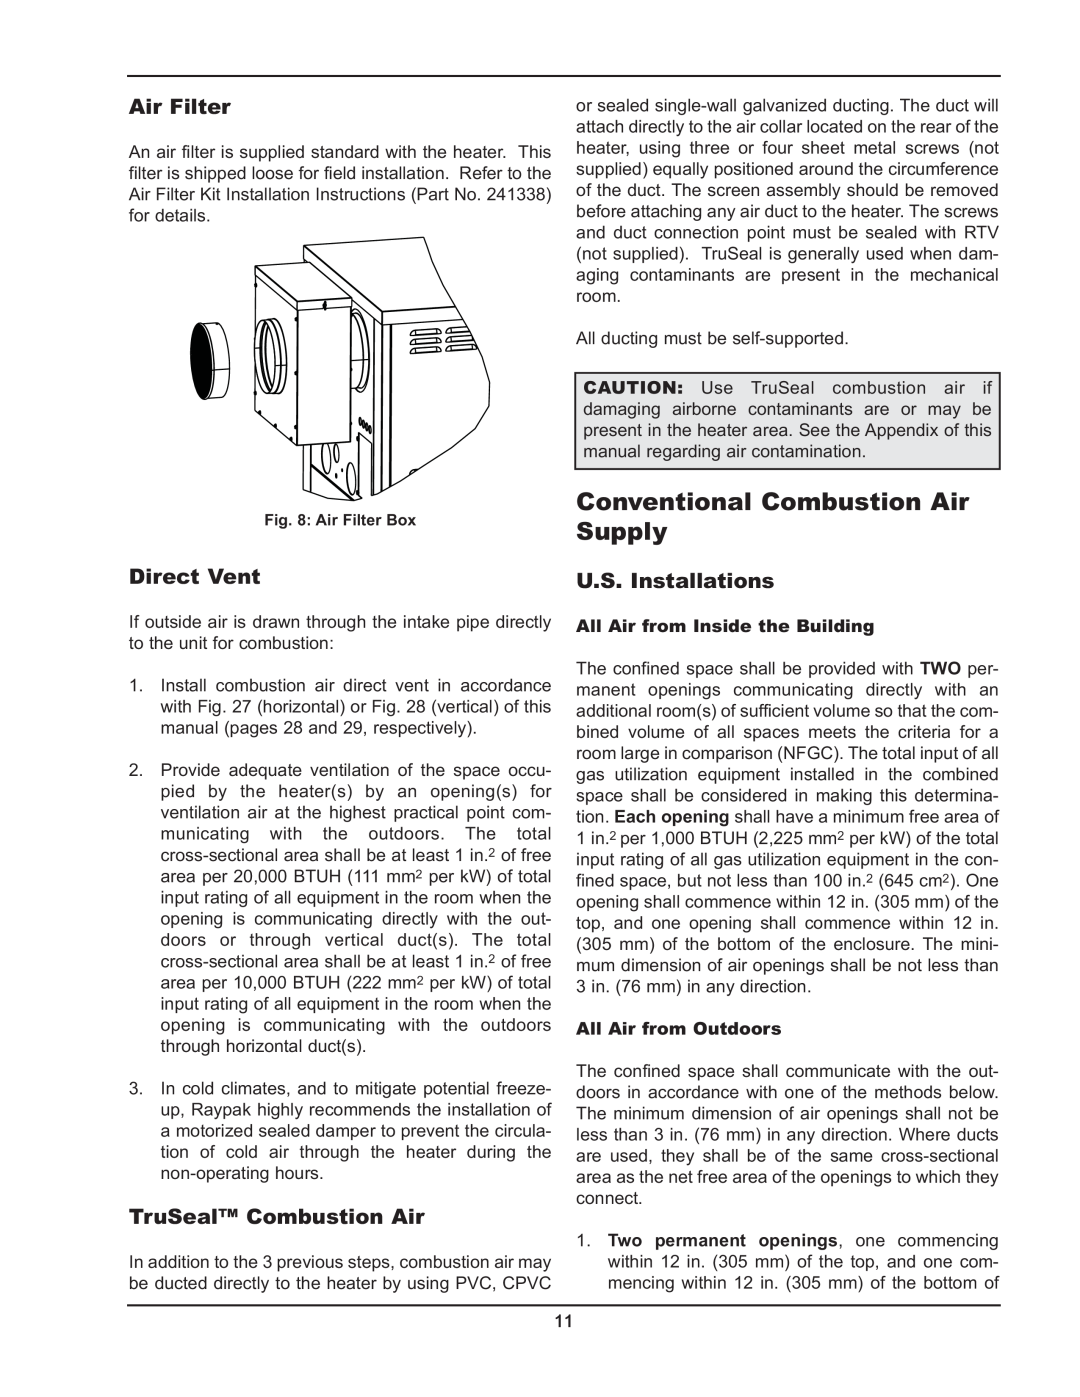 Raypak 5042004 Conventional Combustion Air Supply, Air Filter, Direct Vent, TruSeal Combustion Air, U.S. Installations 